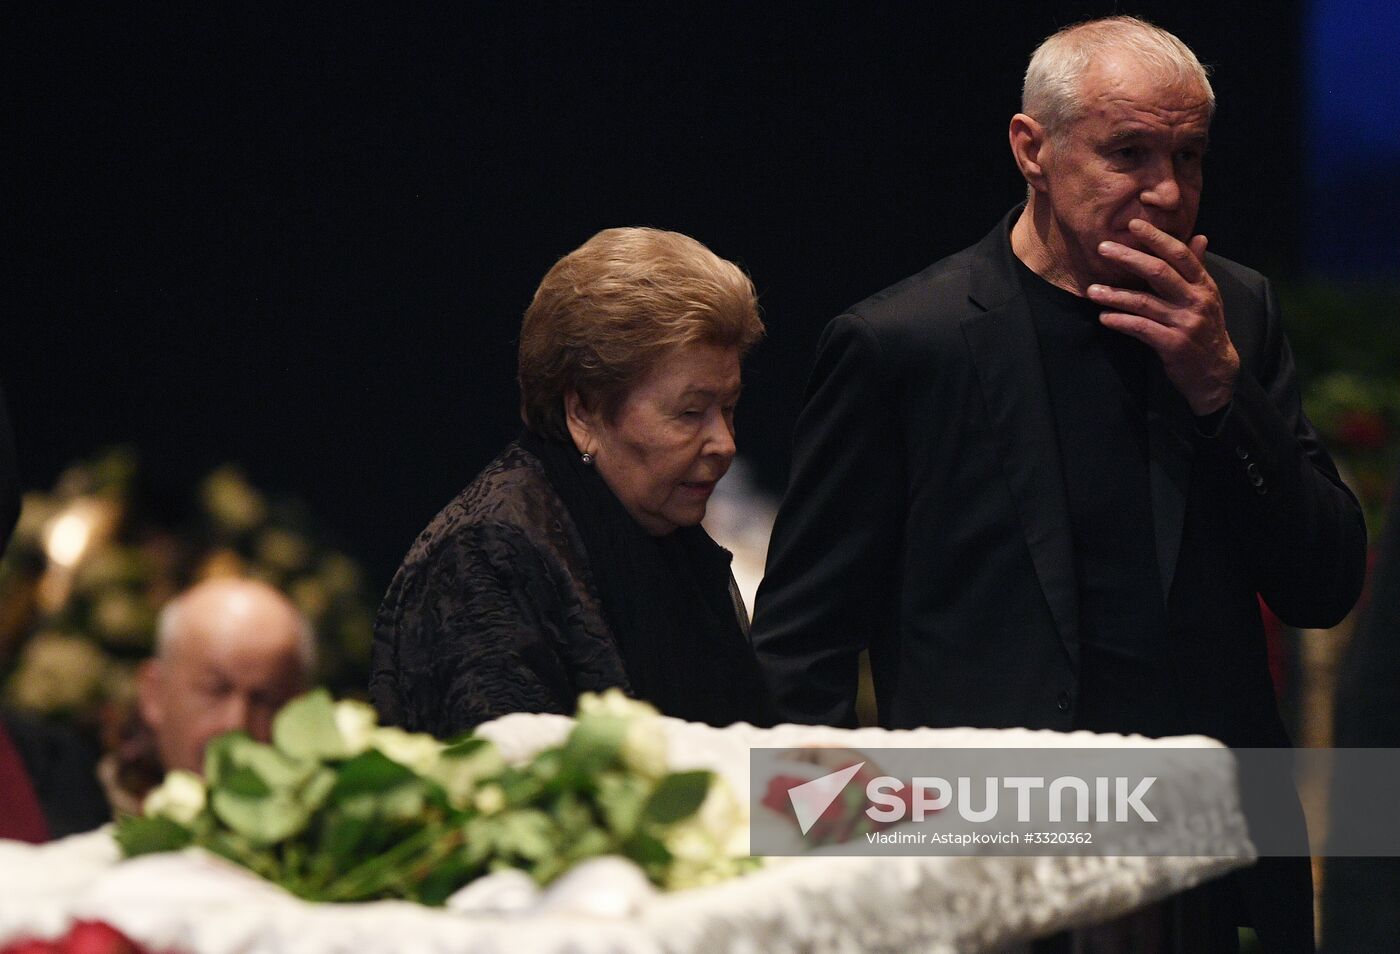 Paying last respects to actor Oleg Tabakov